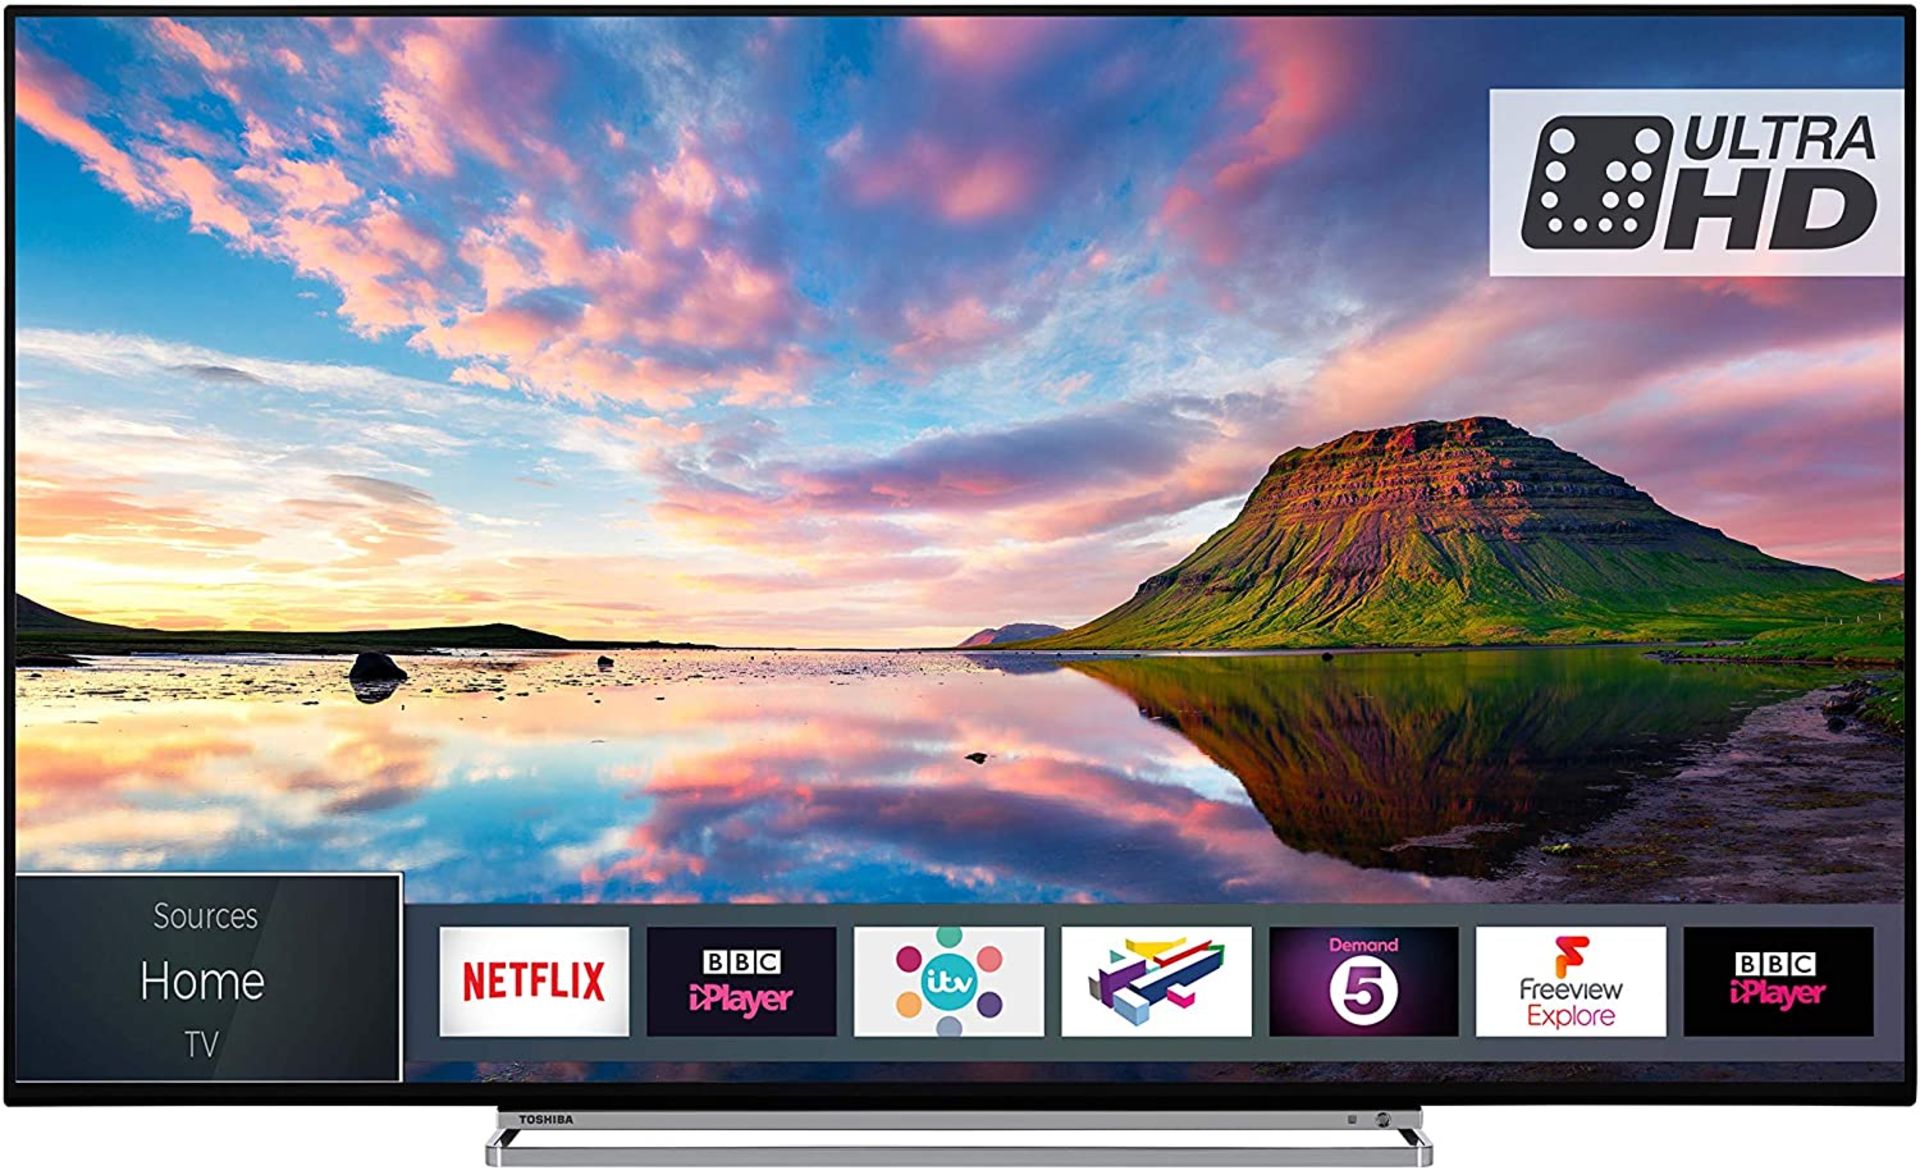 1 TOSHIBA 55U6763 4K SMART TV WITH STAND AND REMOTE RRP Â£449 (WORKING)